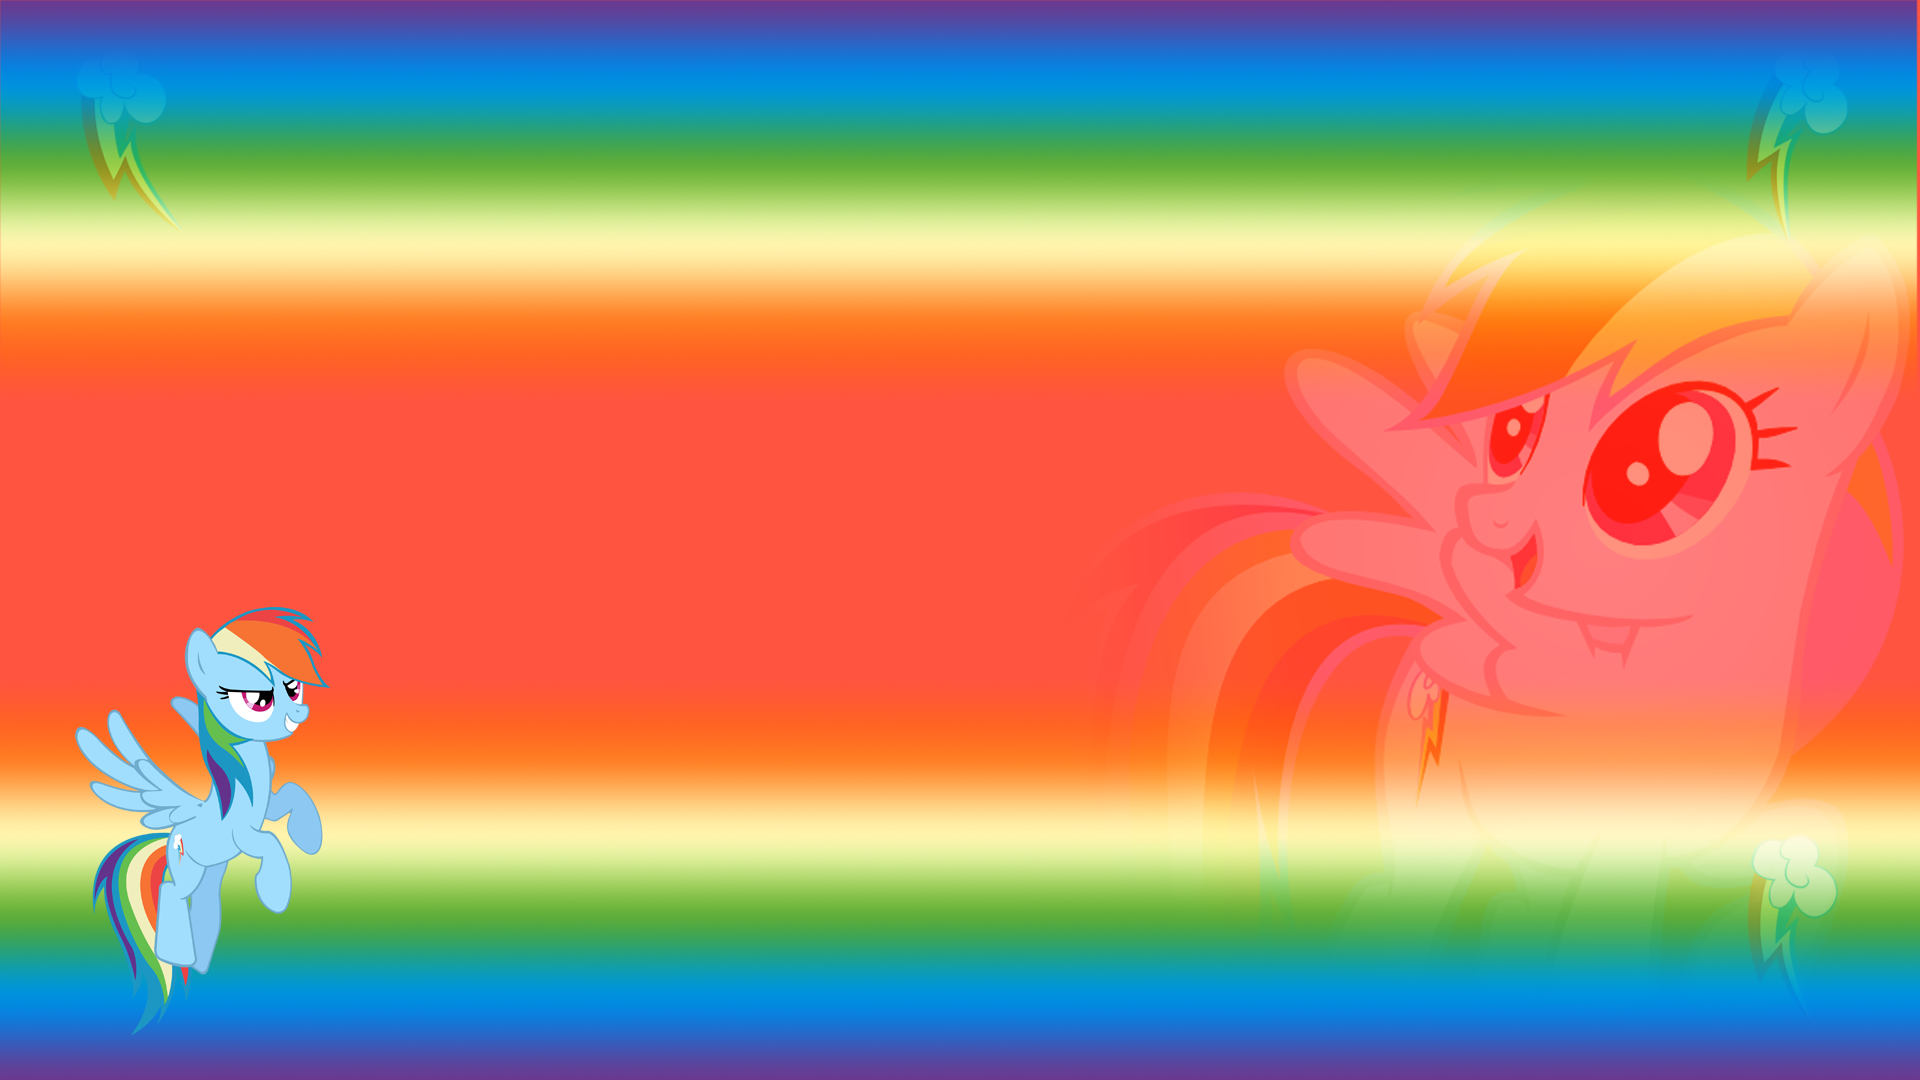 A Dash of Colour by MasterRottweiler, Maximillian-Alpine, Squirrel734 and TheFlamingLlama